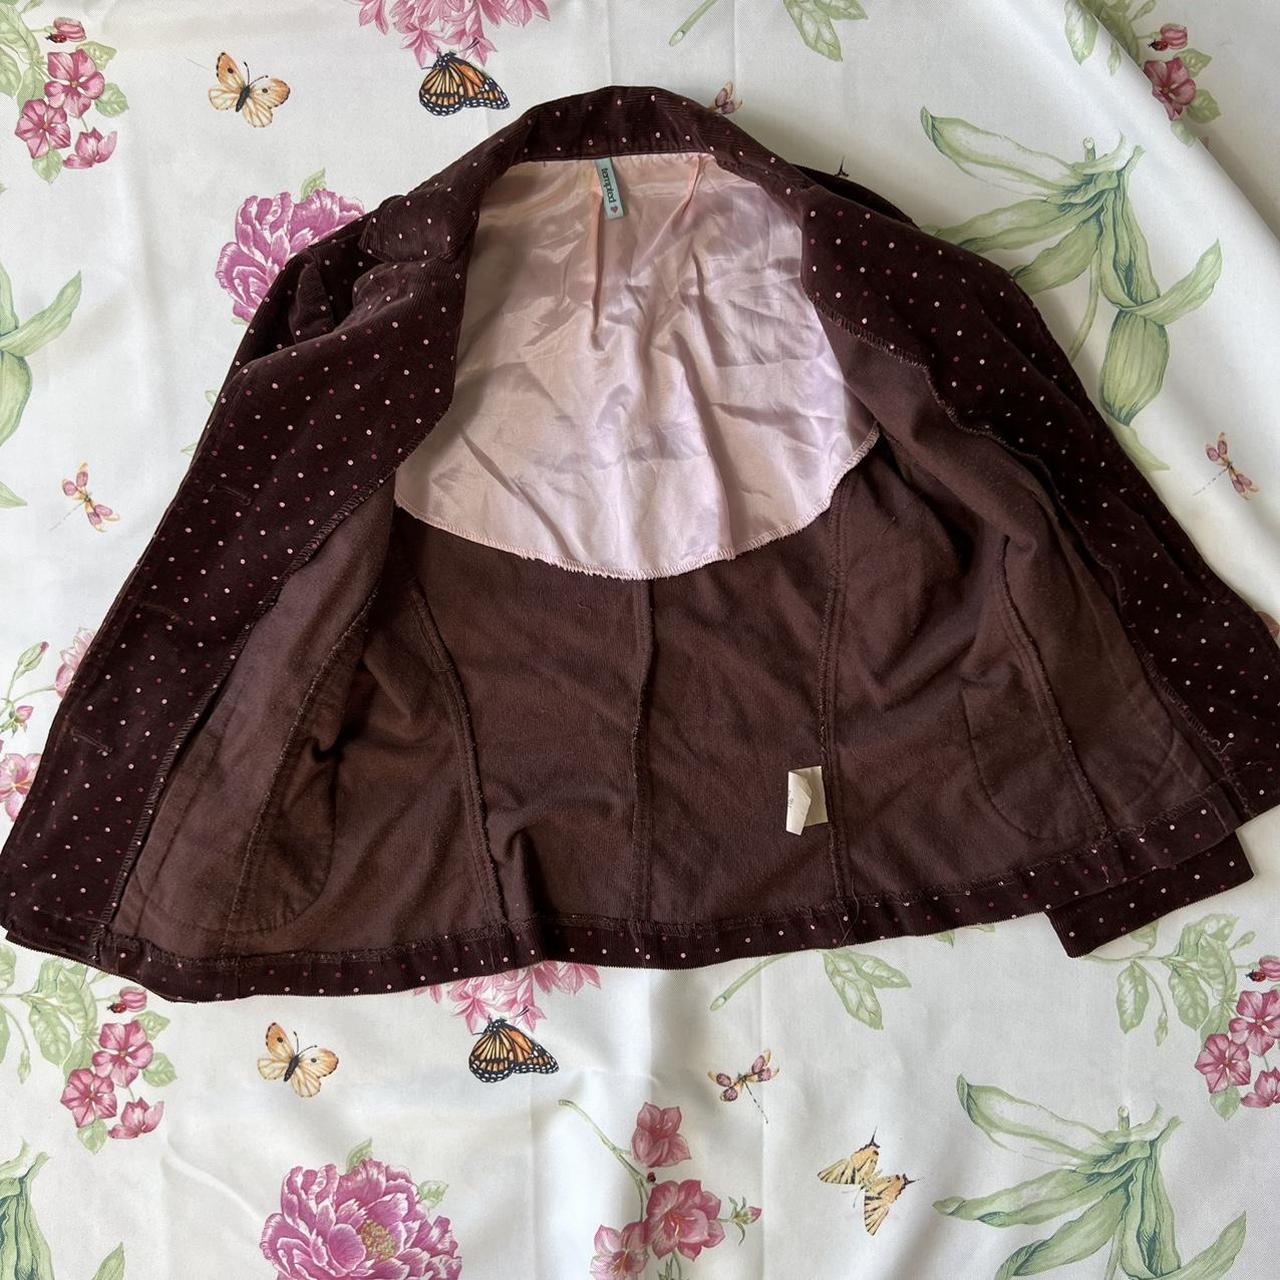 B.Tempt'd Women's Burgundy and Pink Jacket (2)